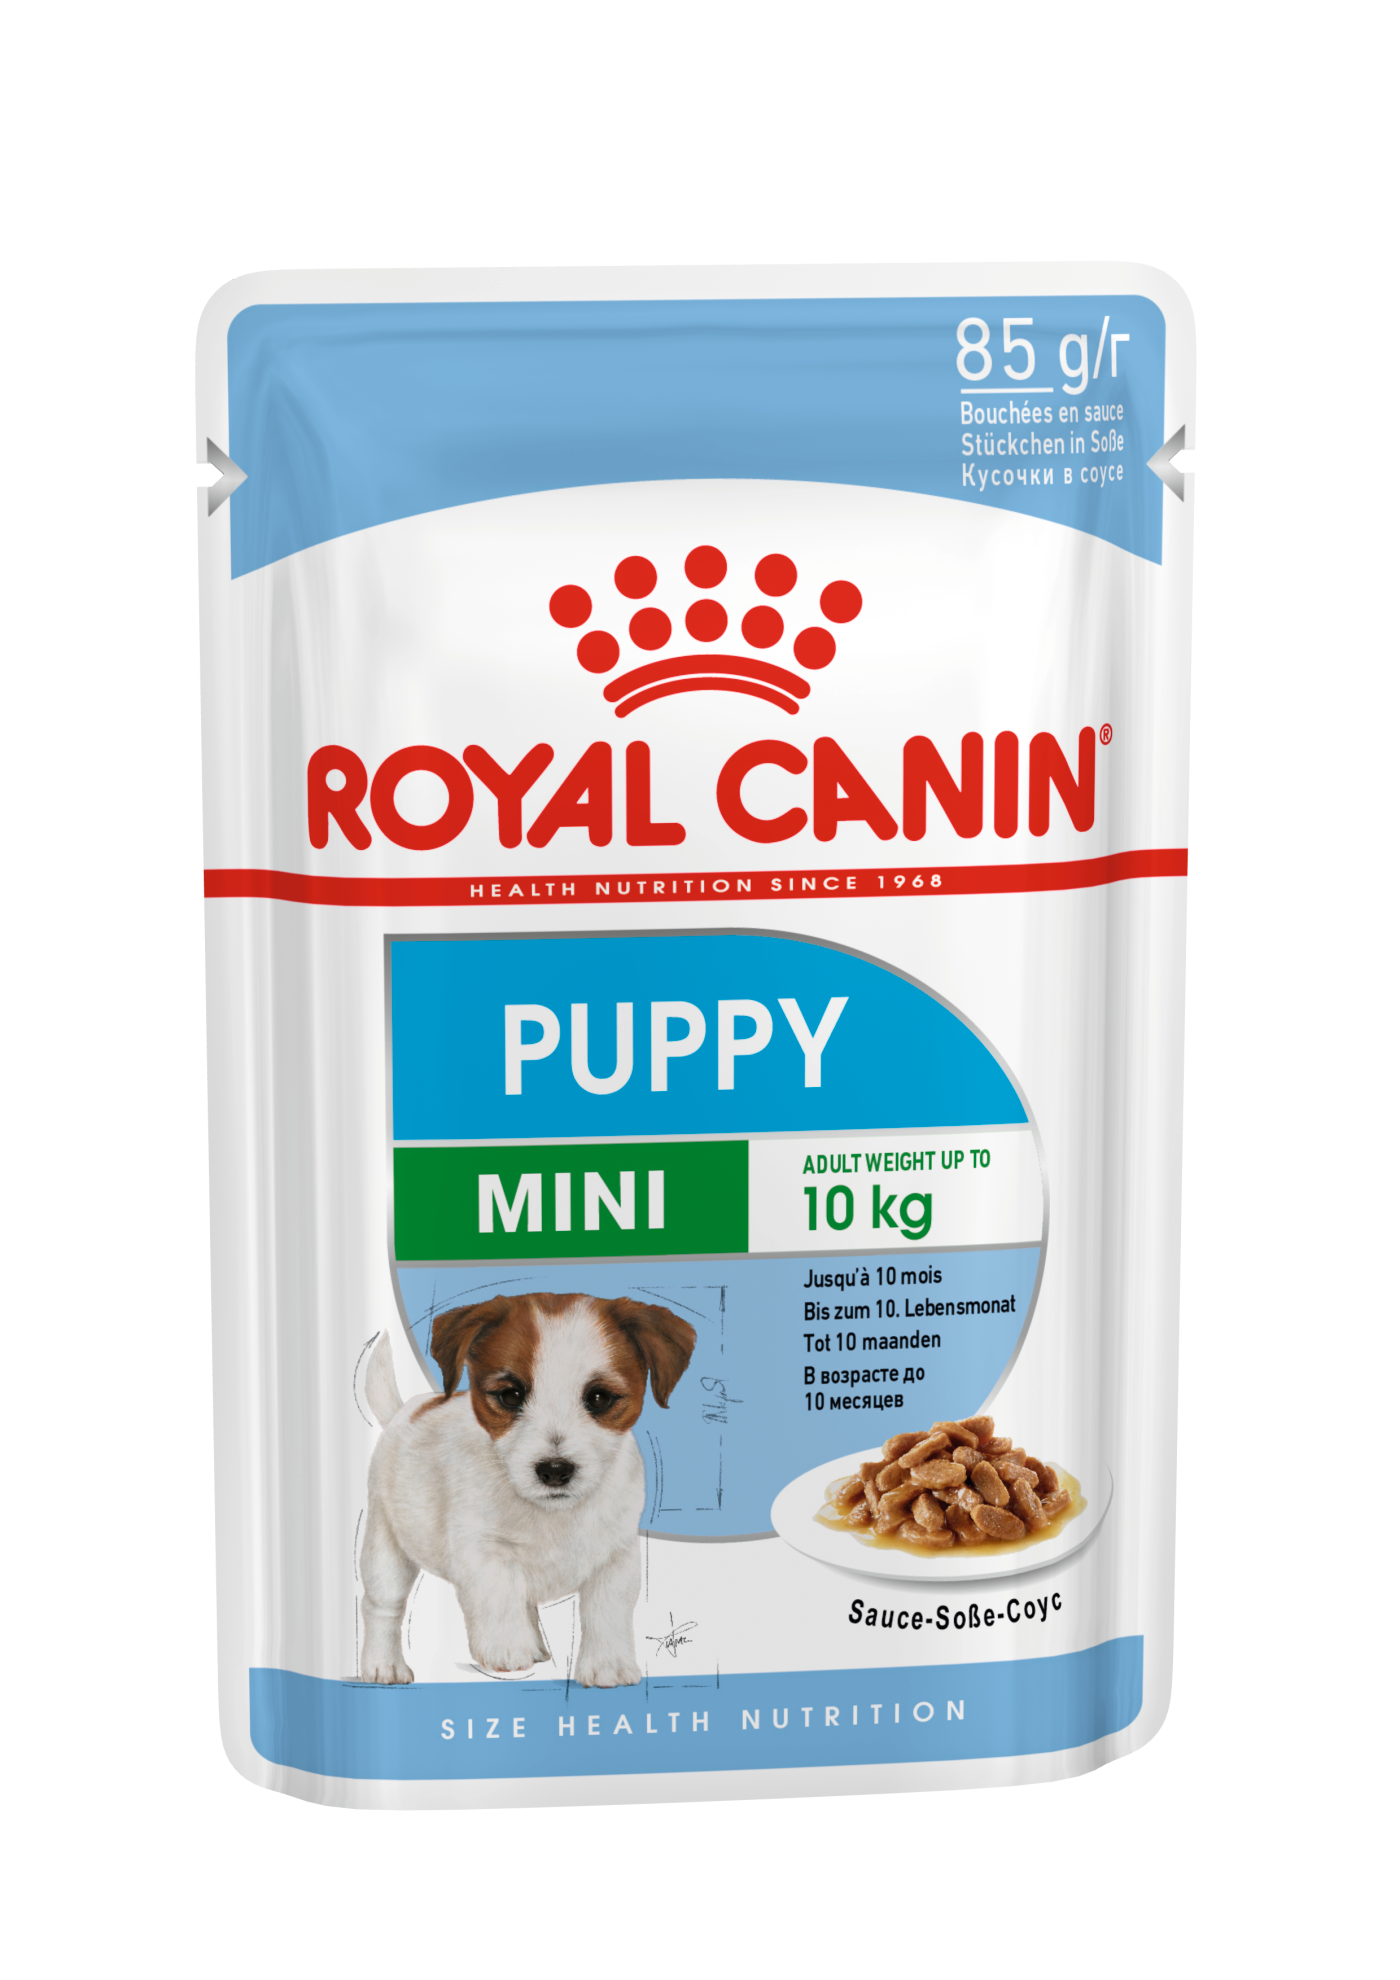 is royal canin dog food worth the money